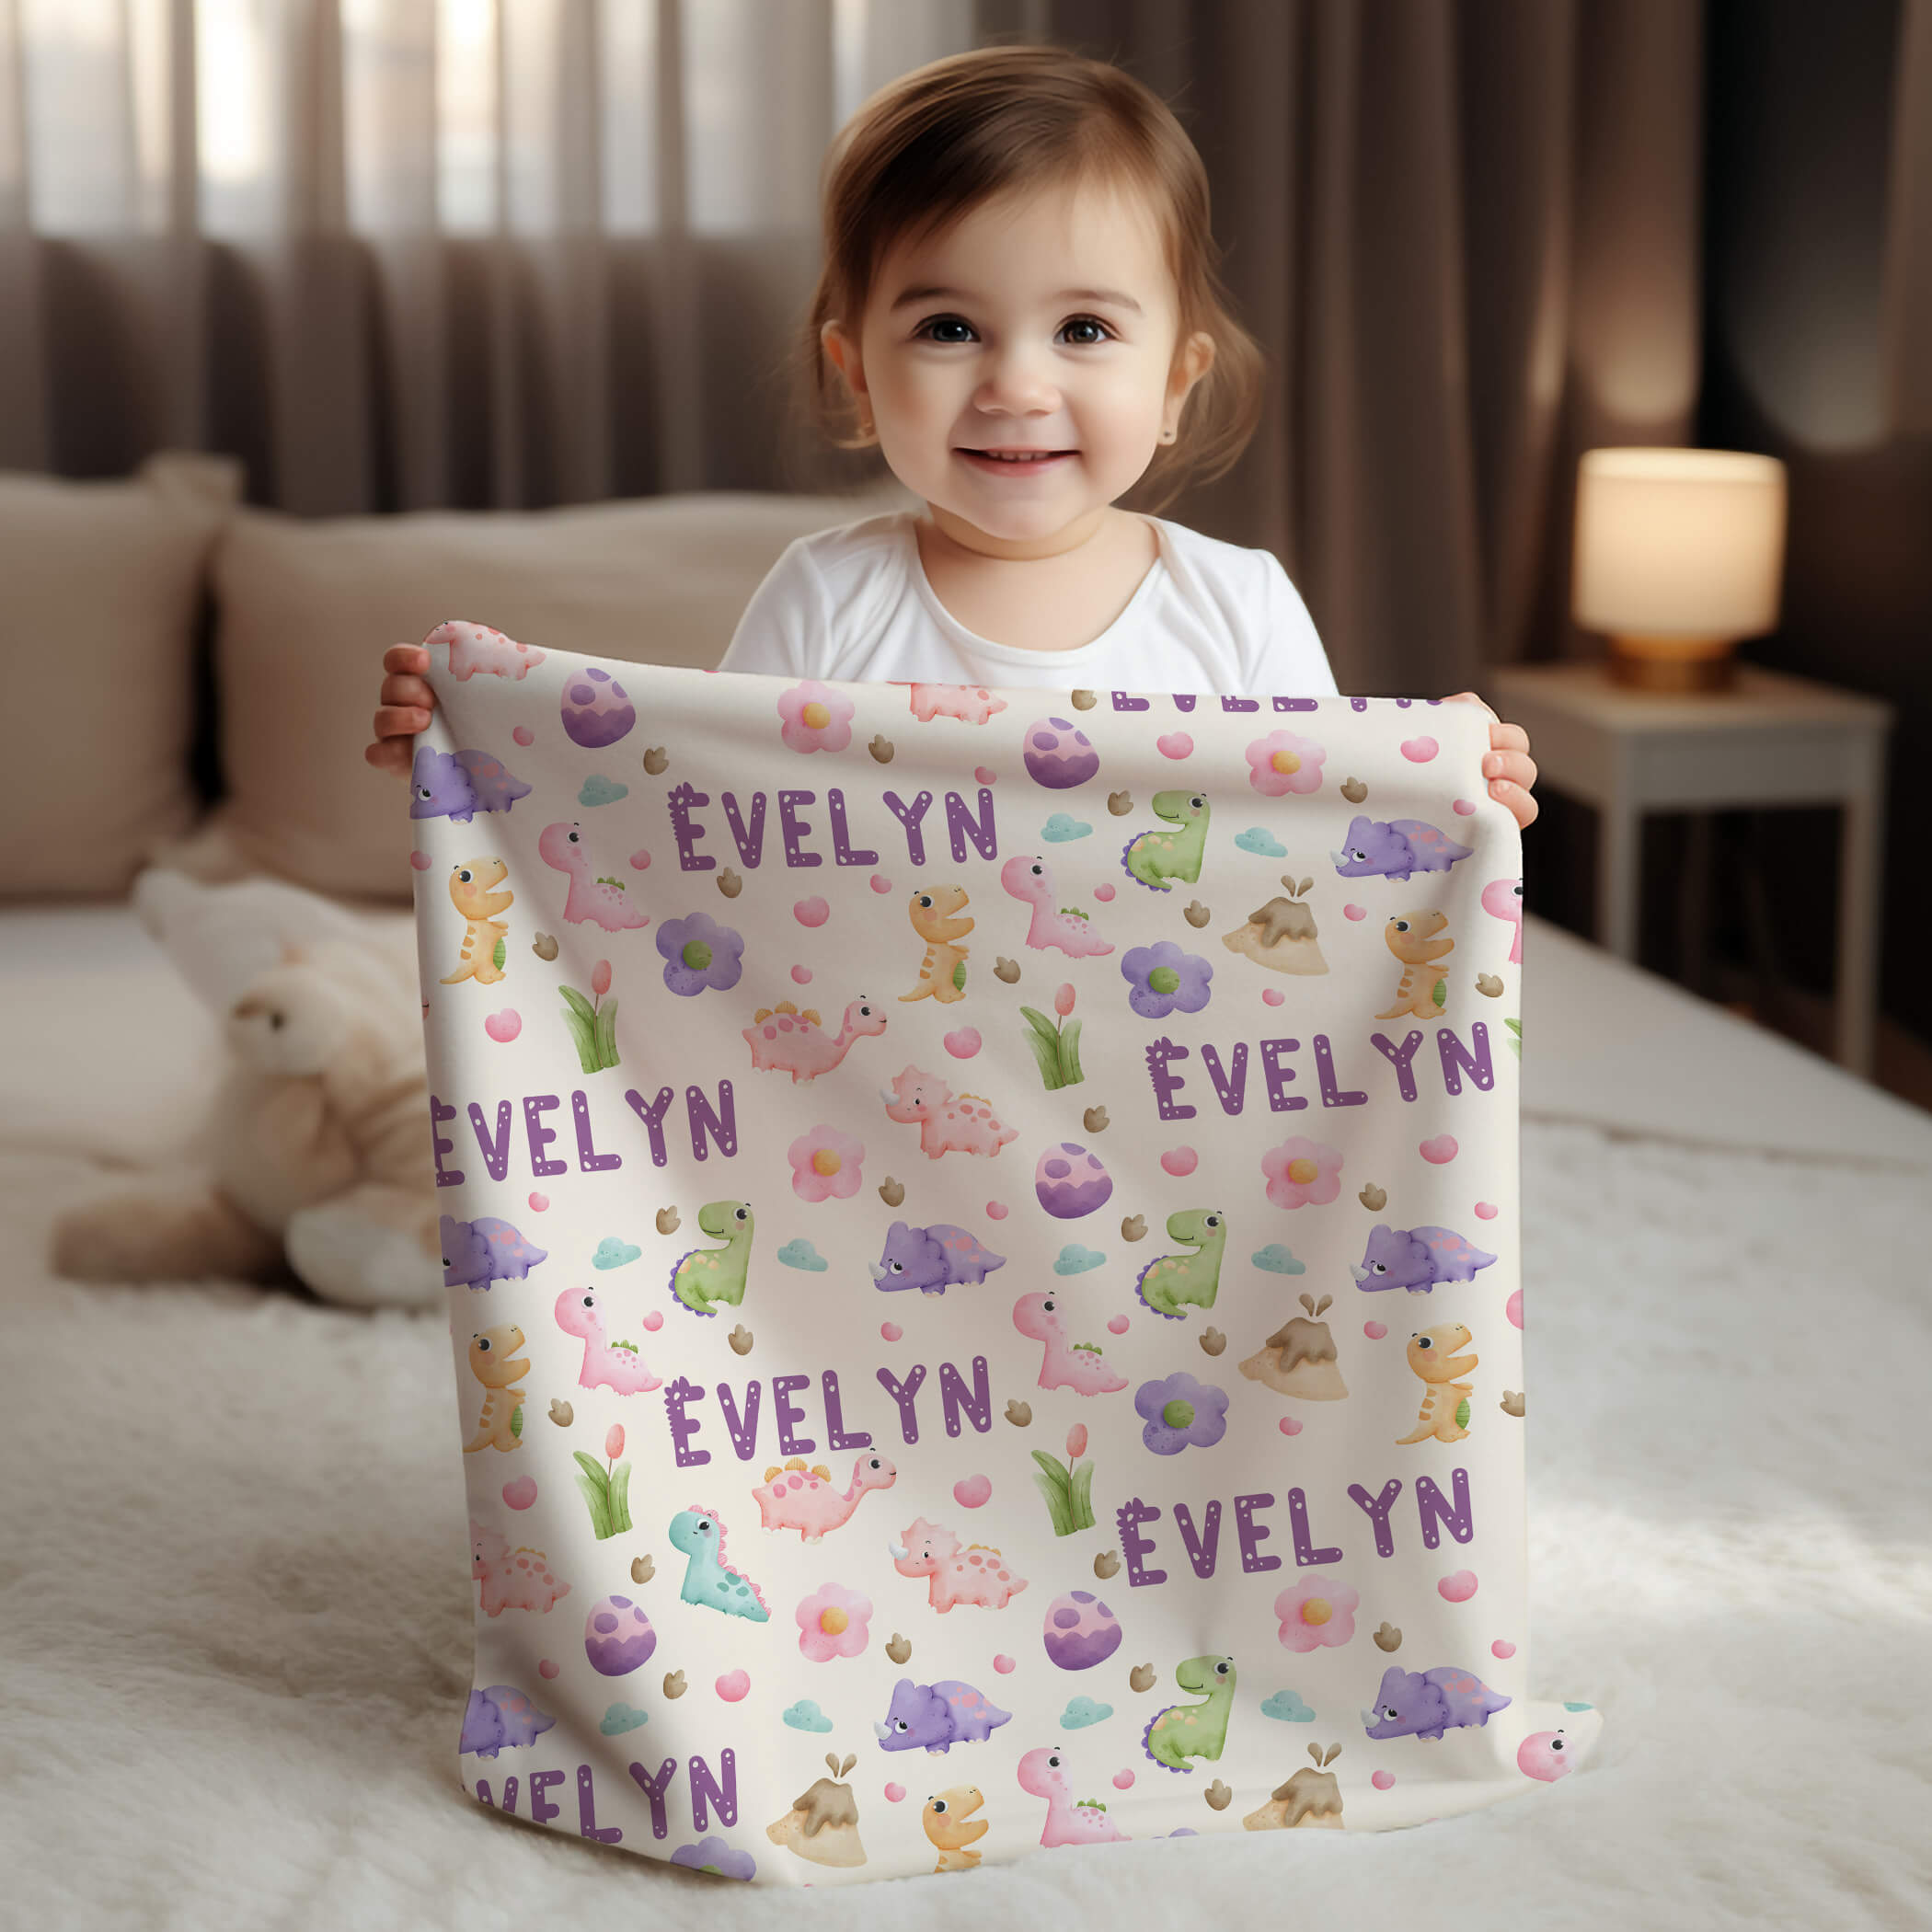 Personalized Name Blanket - Cute Dinosaurs